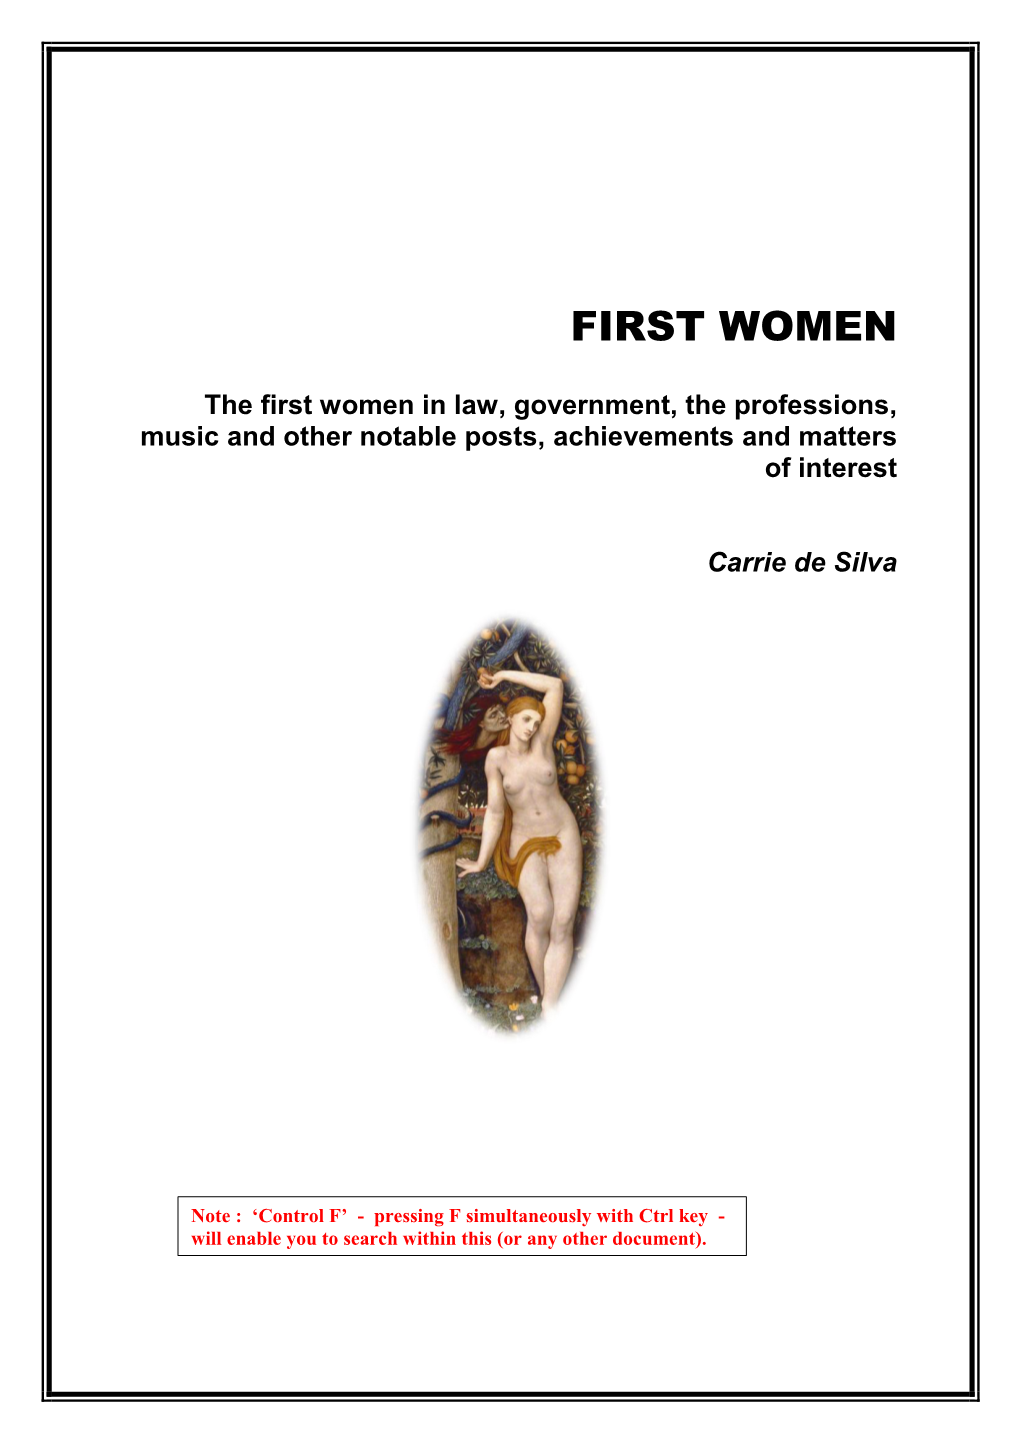 The First Women in Law, Government, the Professions, Music and Other Notable Posts, Achievements and Matters of Interest